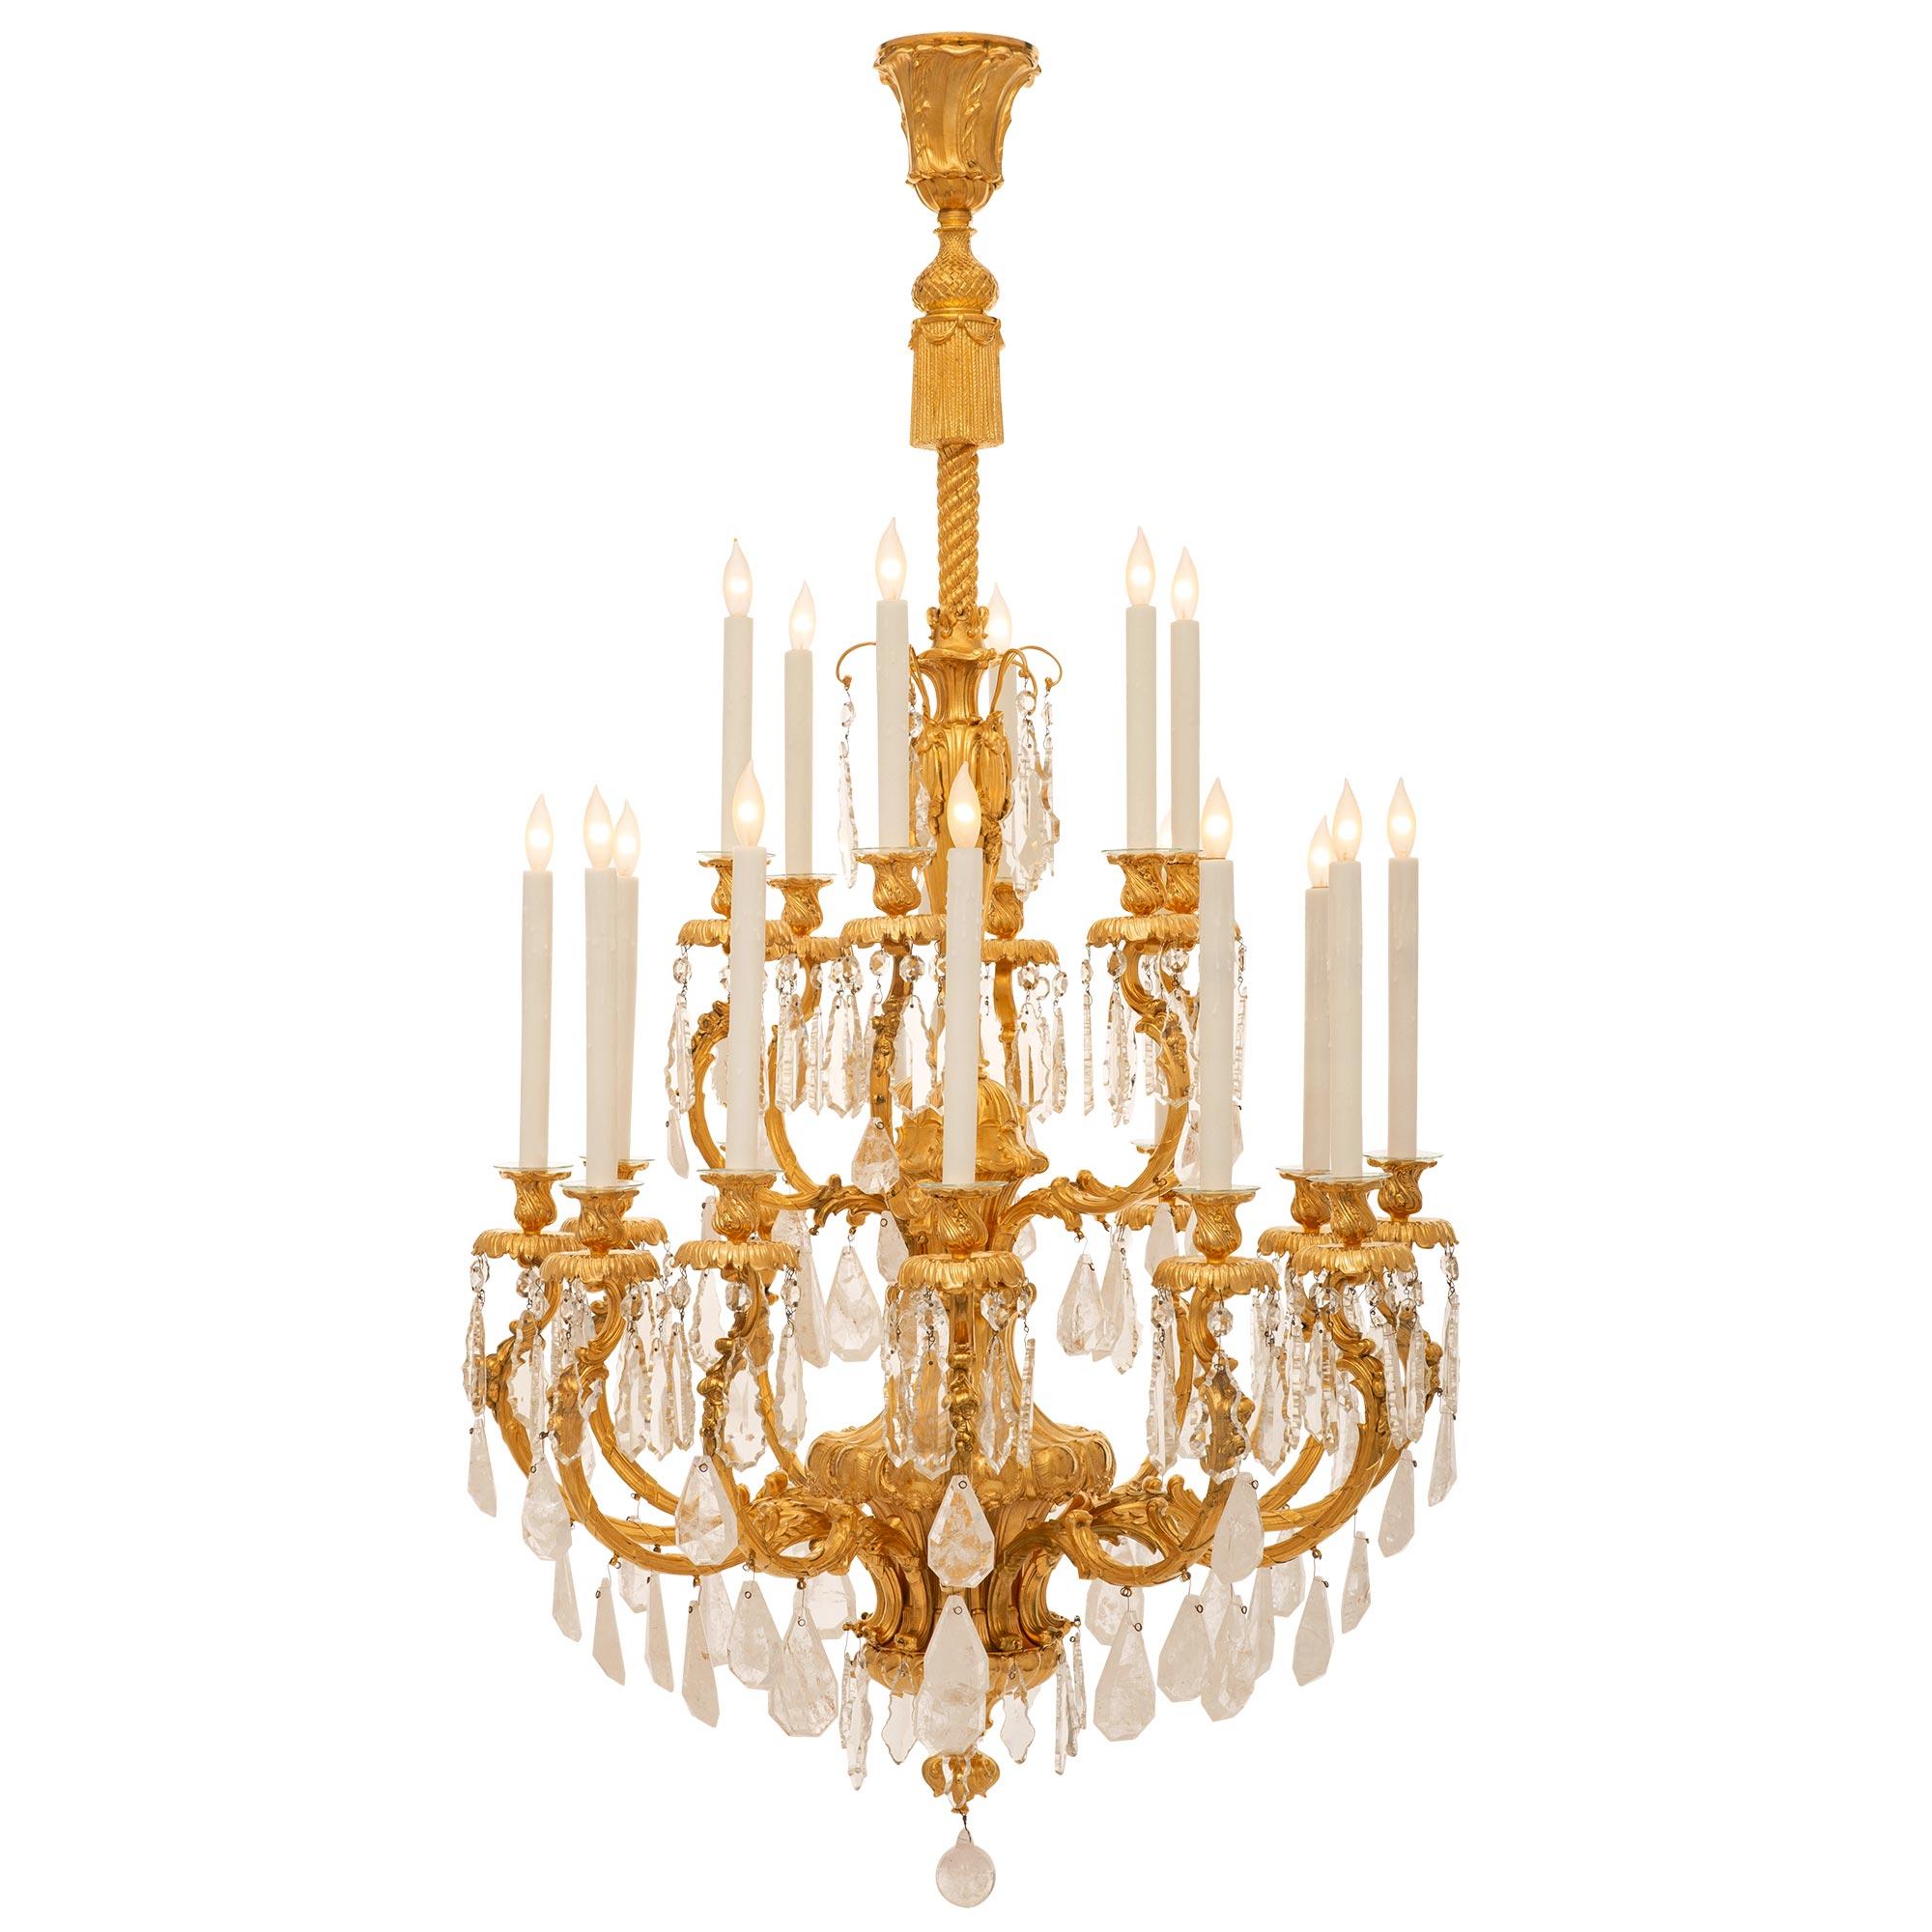 French Louis XV St. Ormolu, Rock Crystal & Baccarat Crystal Chandelier In Good Condition For Sale In West Palm Beach, FL